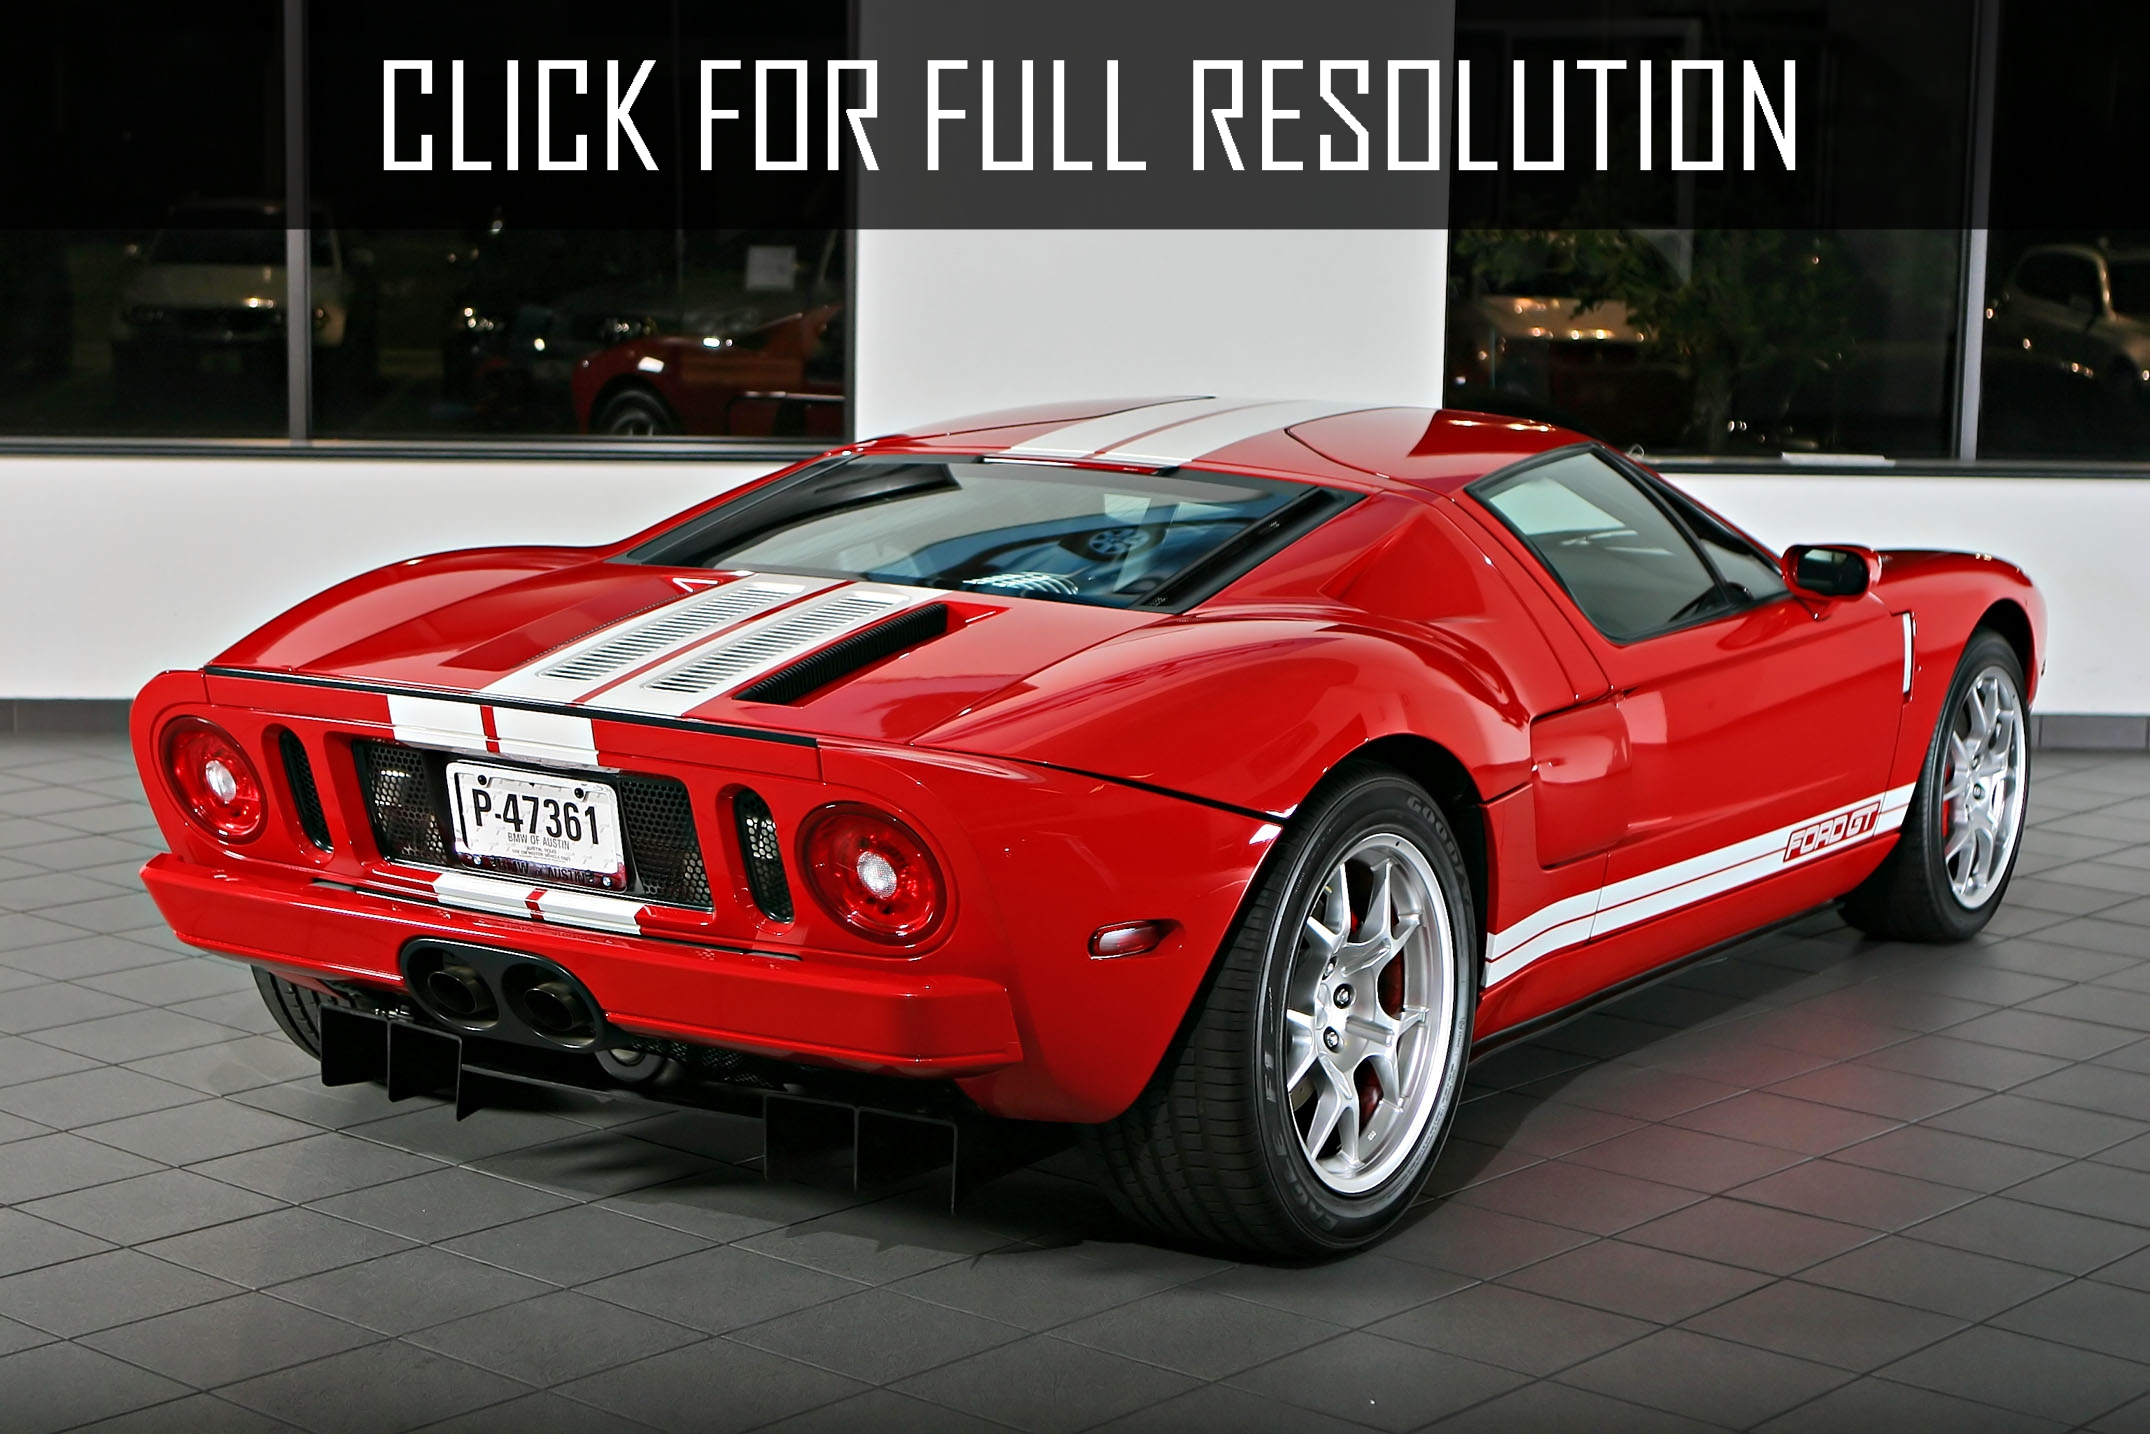 Ford Gt40 2005 reviews, prices, ratings with various photos